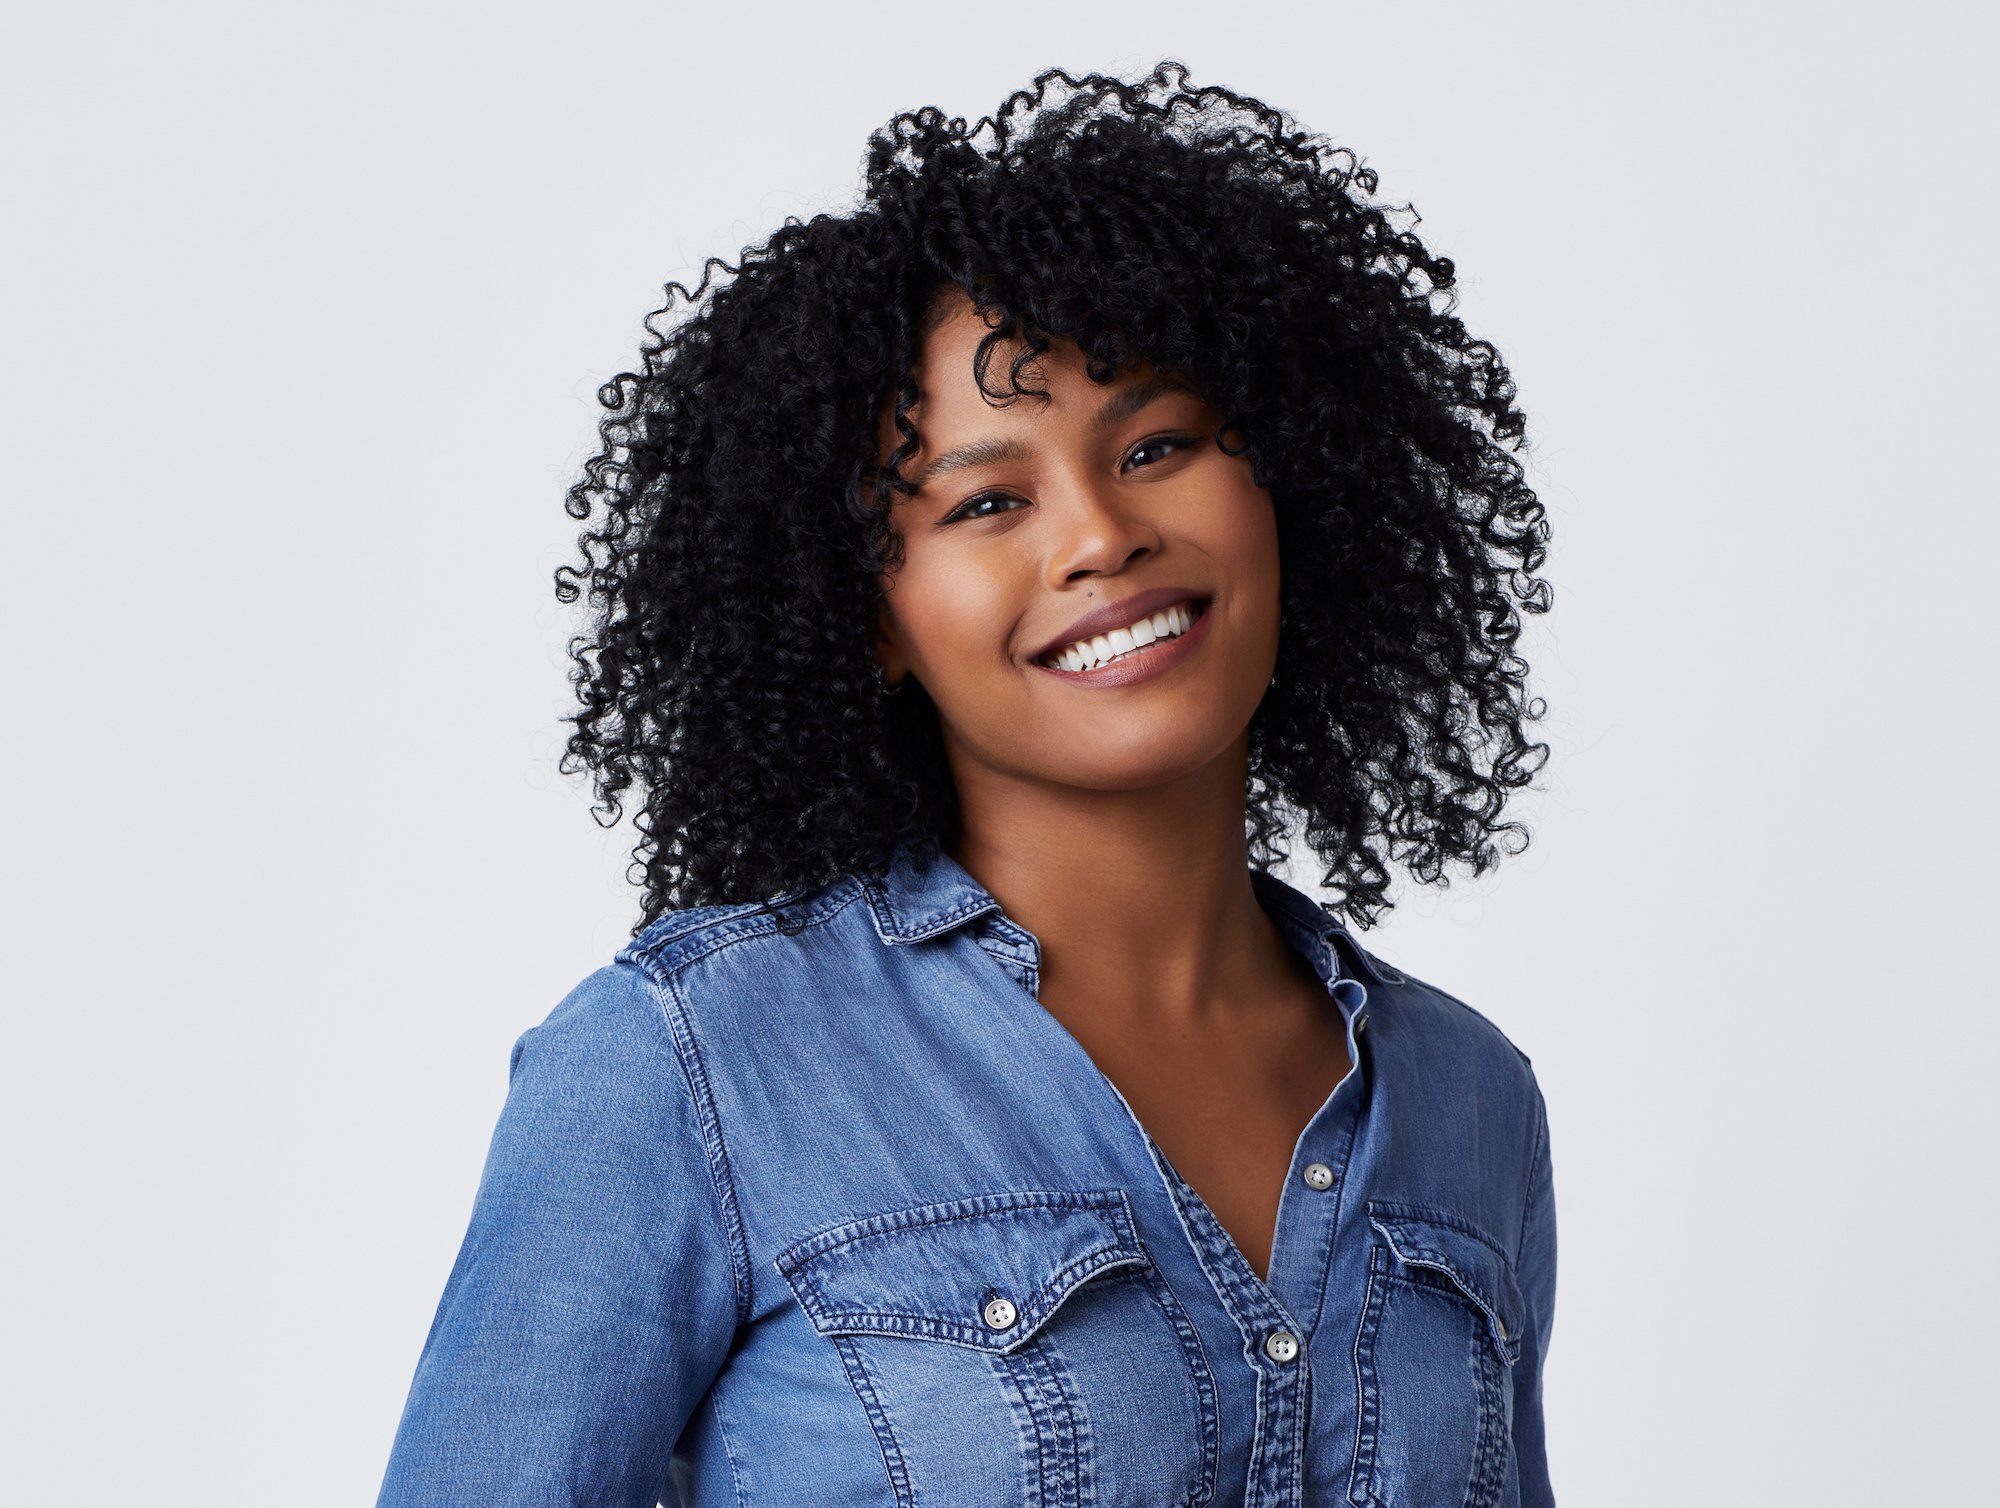 'The Bachelor' 2022 contestant Sierra Jackson in a promotional image wearing a denim button down.